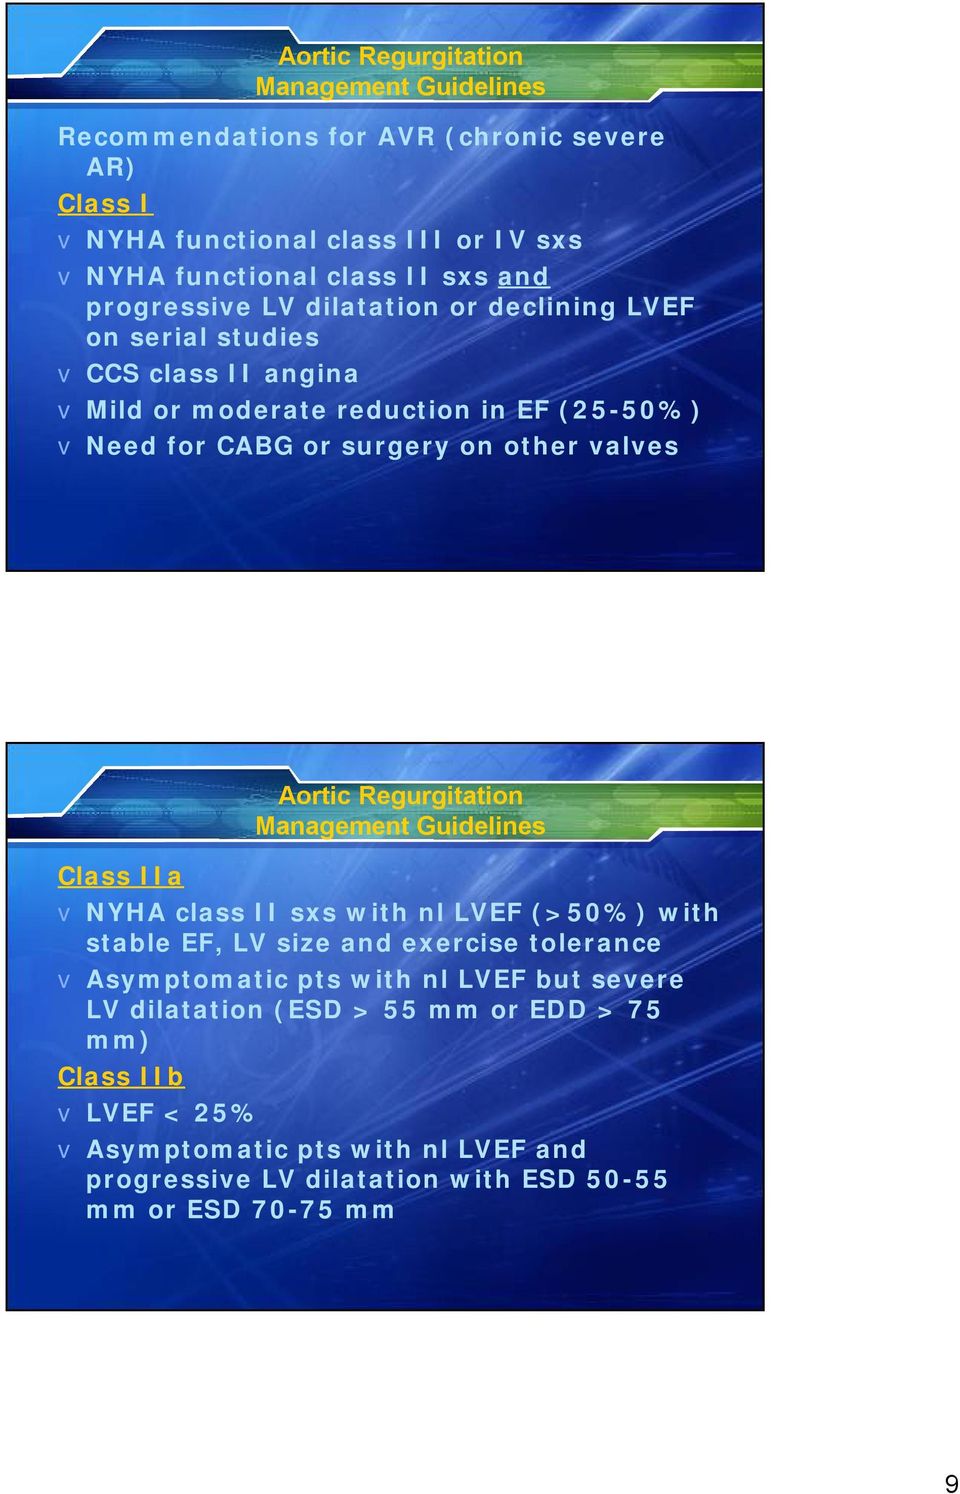 Aortic Regurgitation Management Guidelines Class IIa v NYHA class II sxs with nl LVEF (>50%) with stable EF, LV size and exercise tolerance v Asymptomatic pts with nl LVEF